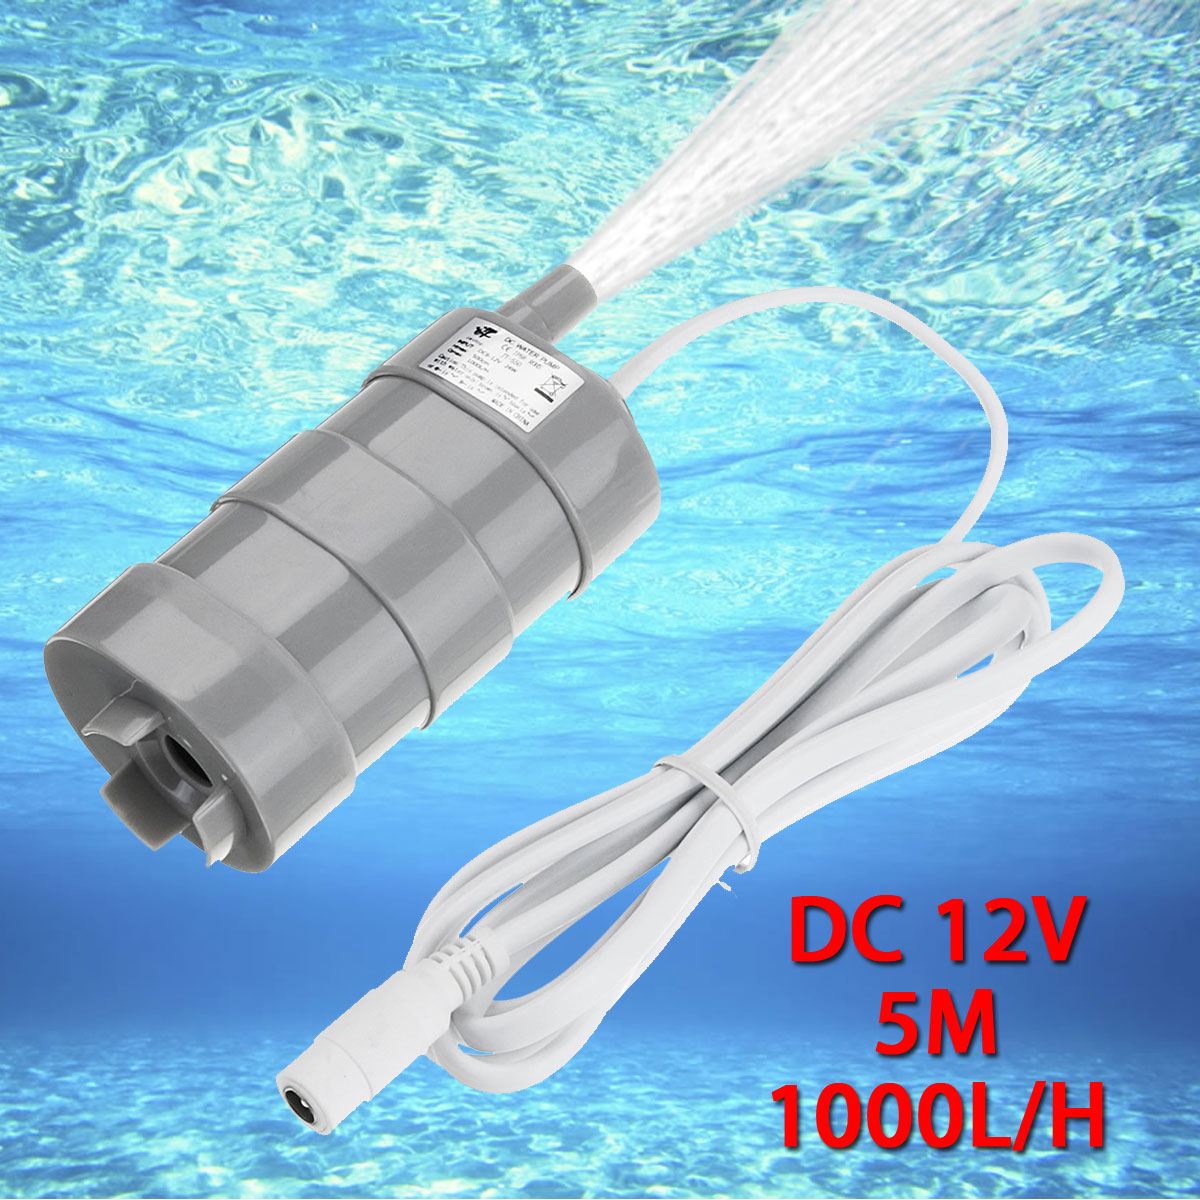 DC-12V-Pump-Solar-Brushless-Magnetic-Submersible-Water-Pump-5M-1000LH-Fish-Pond-Garden-Boat-1302228-1